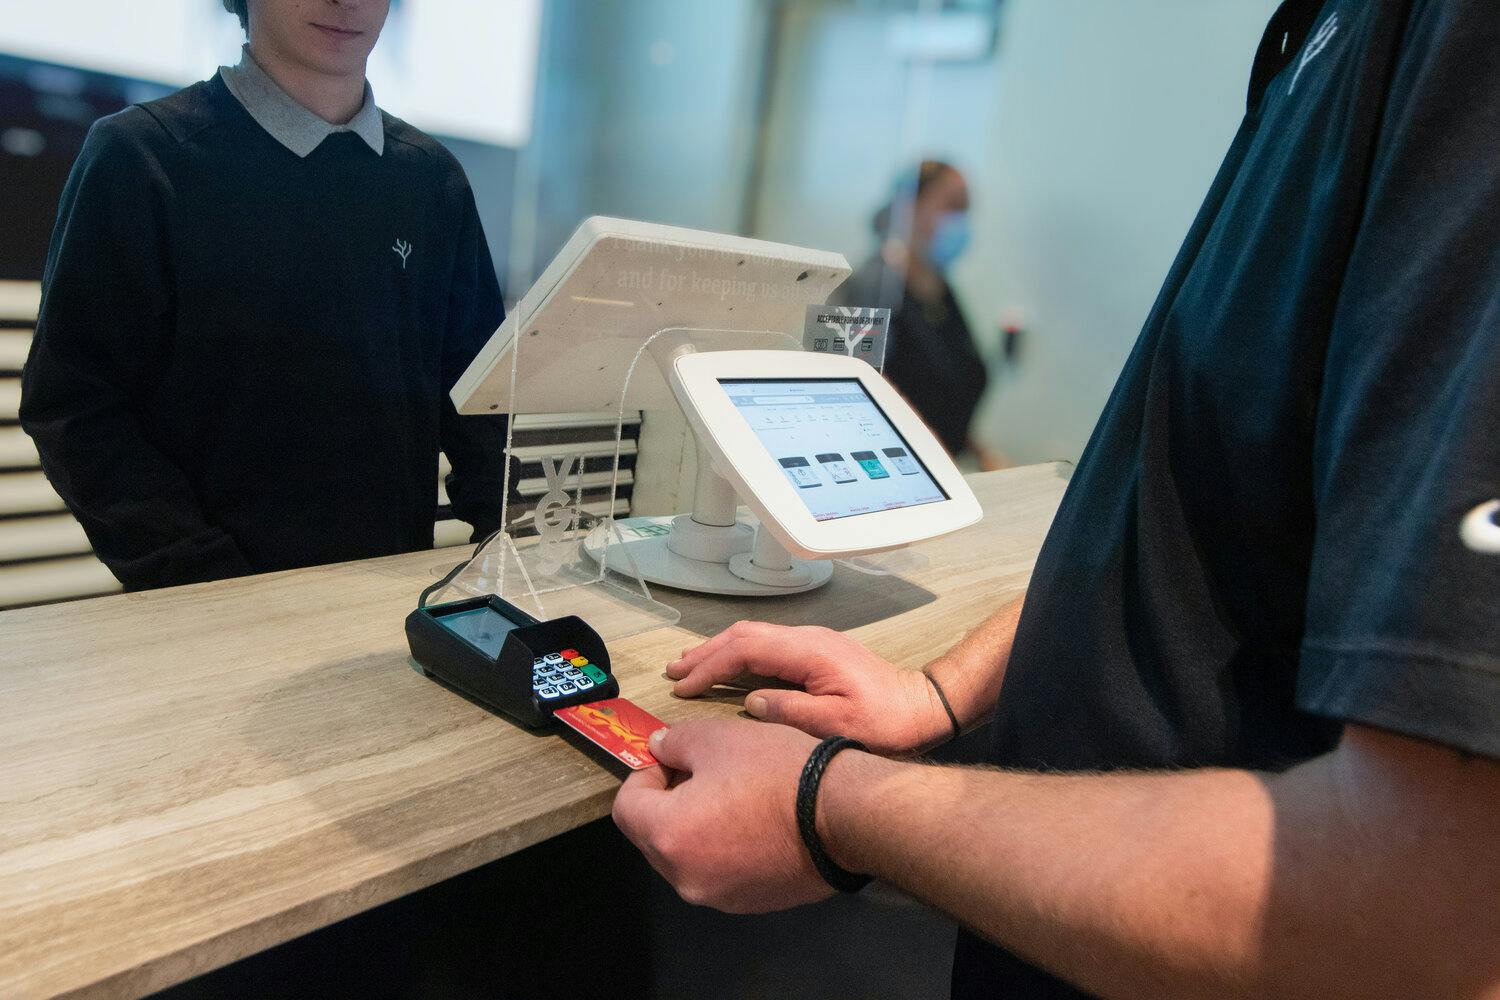 A person passes their debit card to a dispensary employee. A computer displays a POS system with analytics, roles, stores and users. 